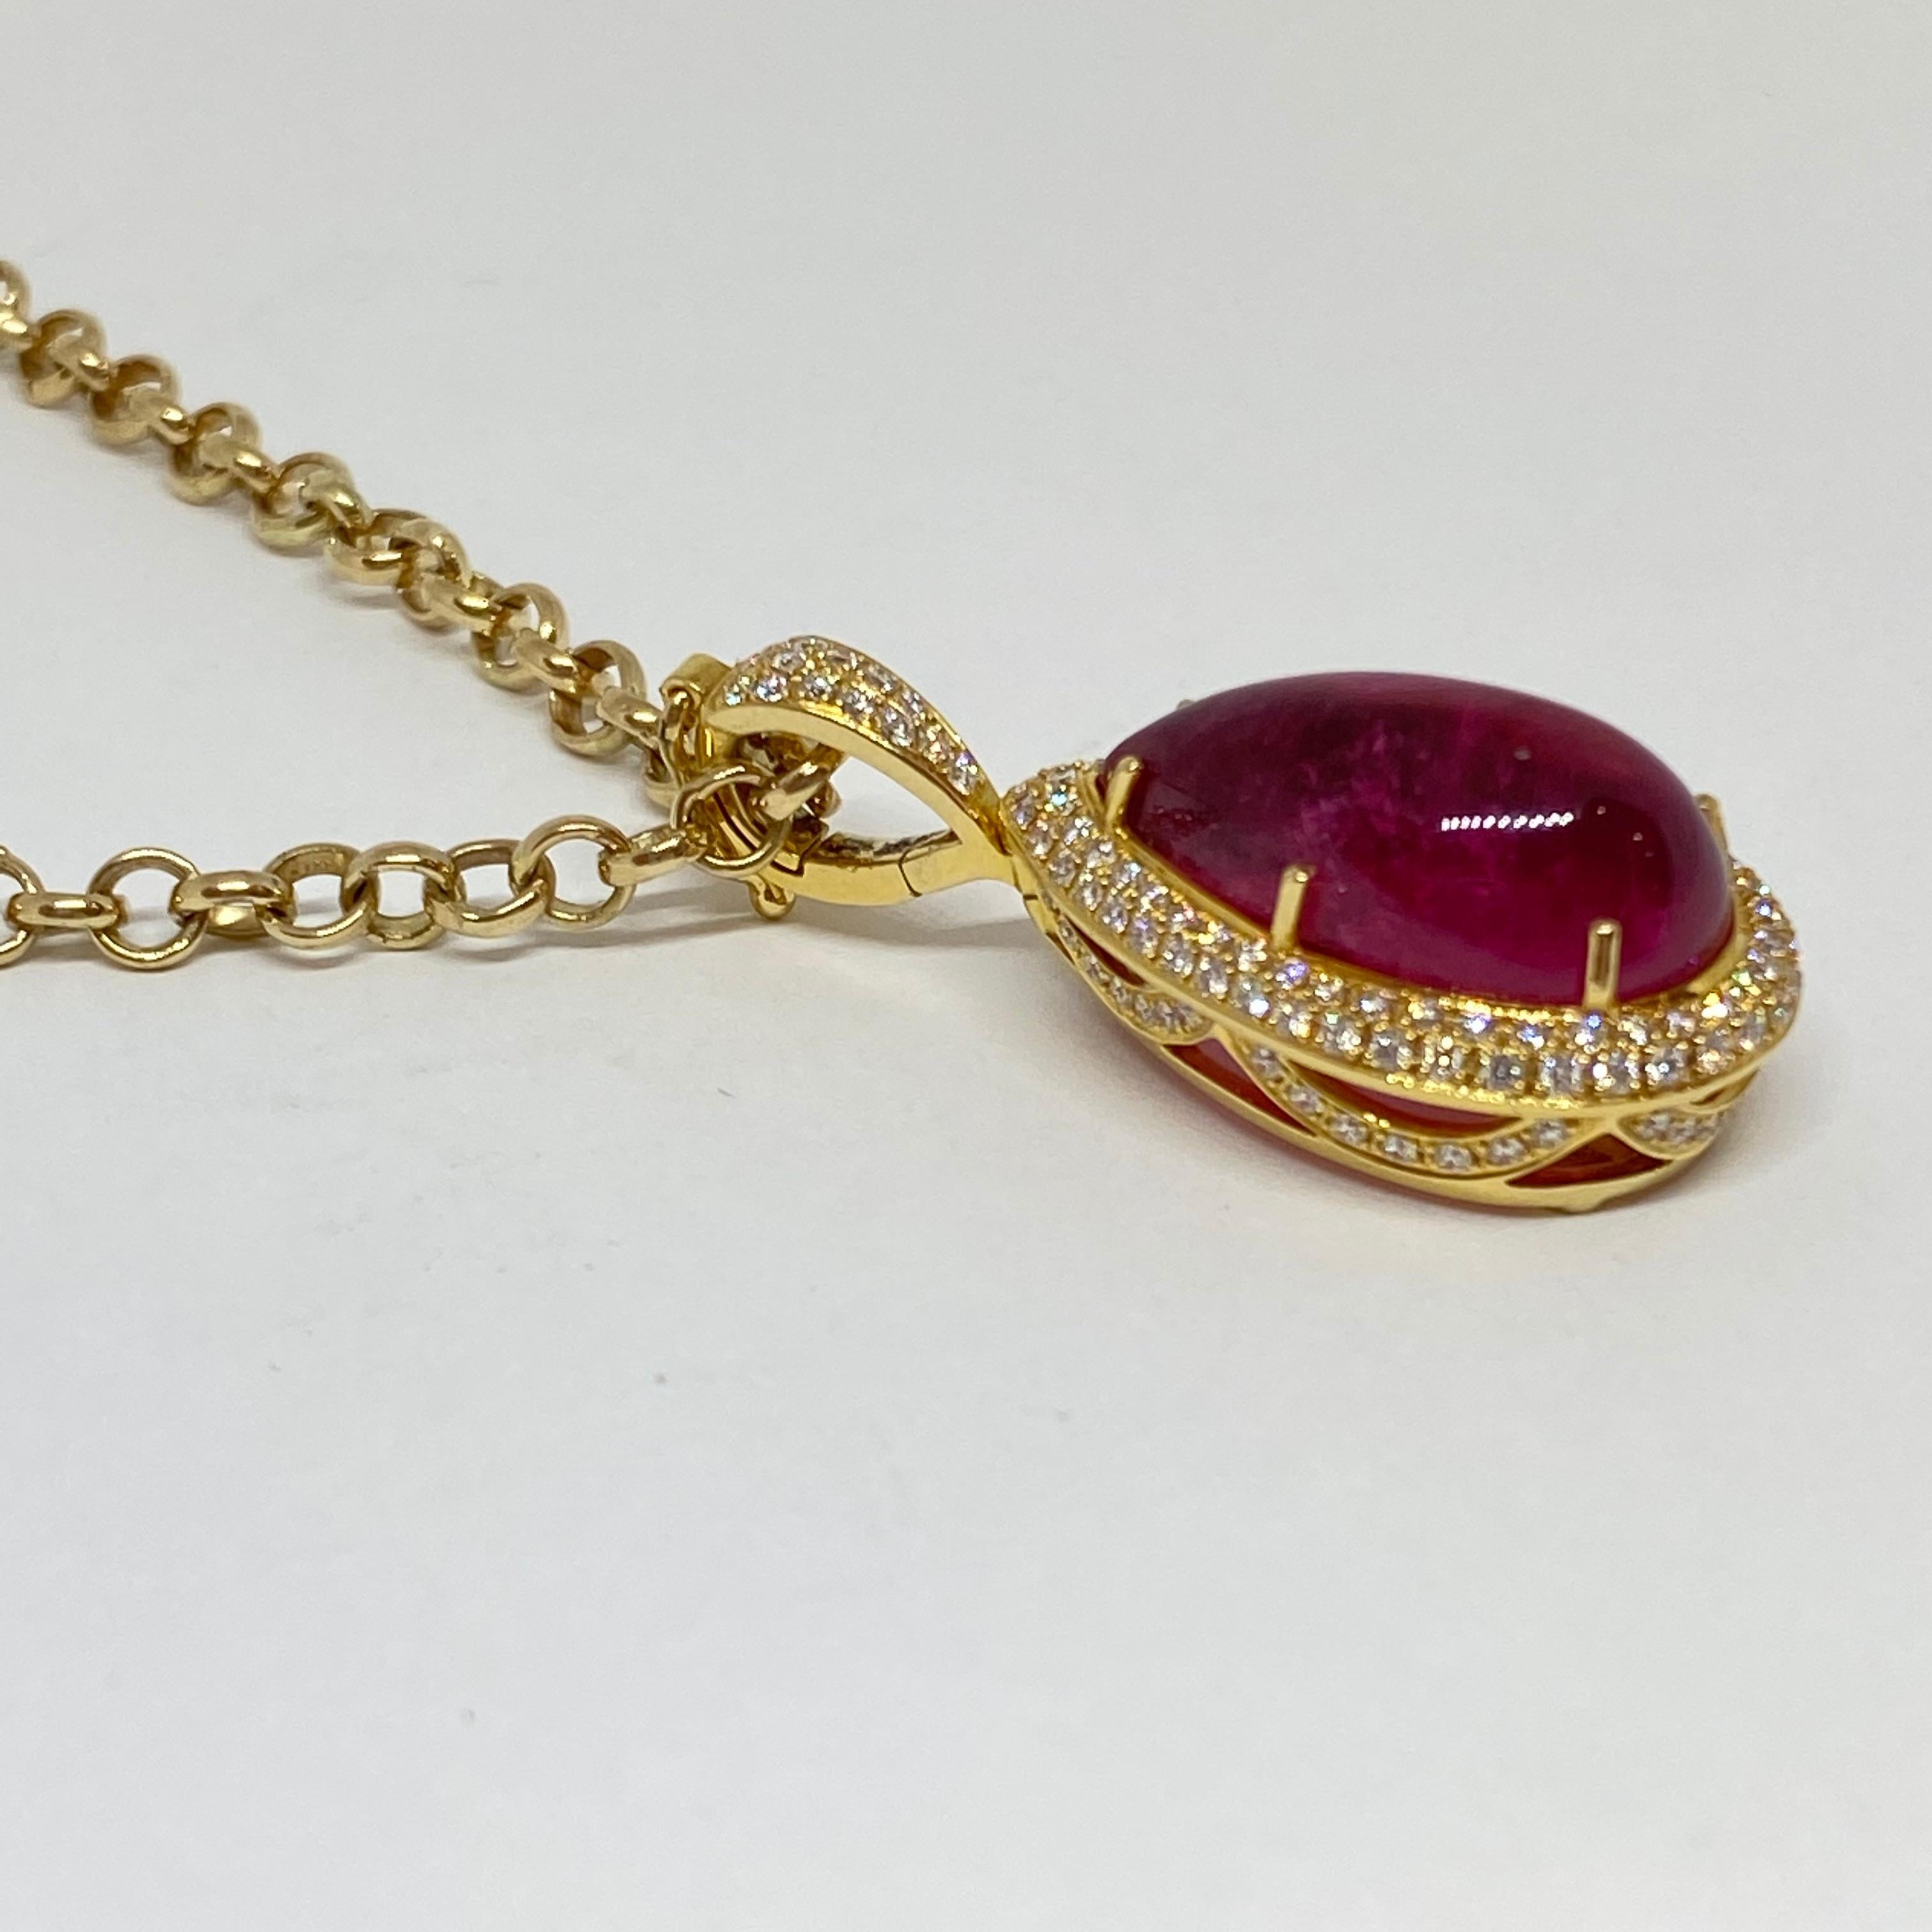 This unique pink tourmaline and diamond pendant is fashioned from 18 karat yellow gold. The pink tourmaline is a pear shape cabochon weighing 17.10 carats (12.6mm x 21.2mm) with a deep pink color. The tourmaline is set in six prongs, surrounded by